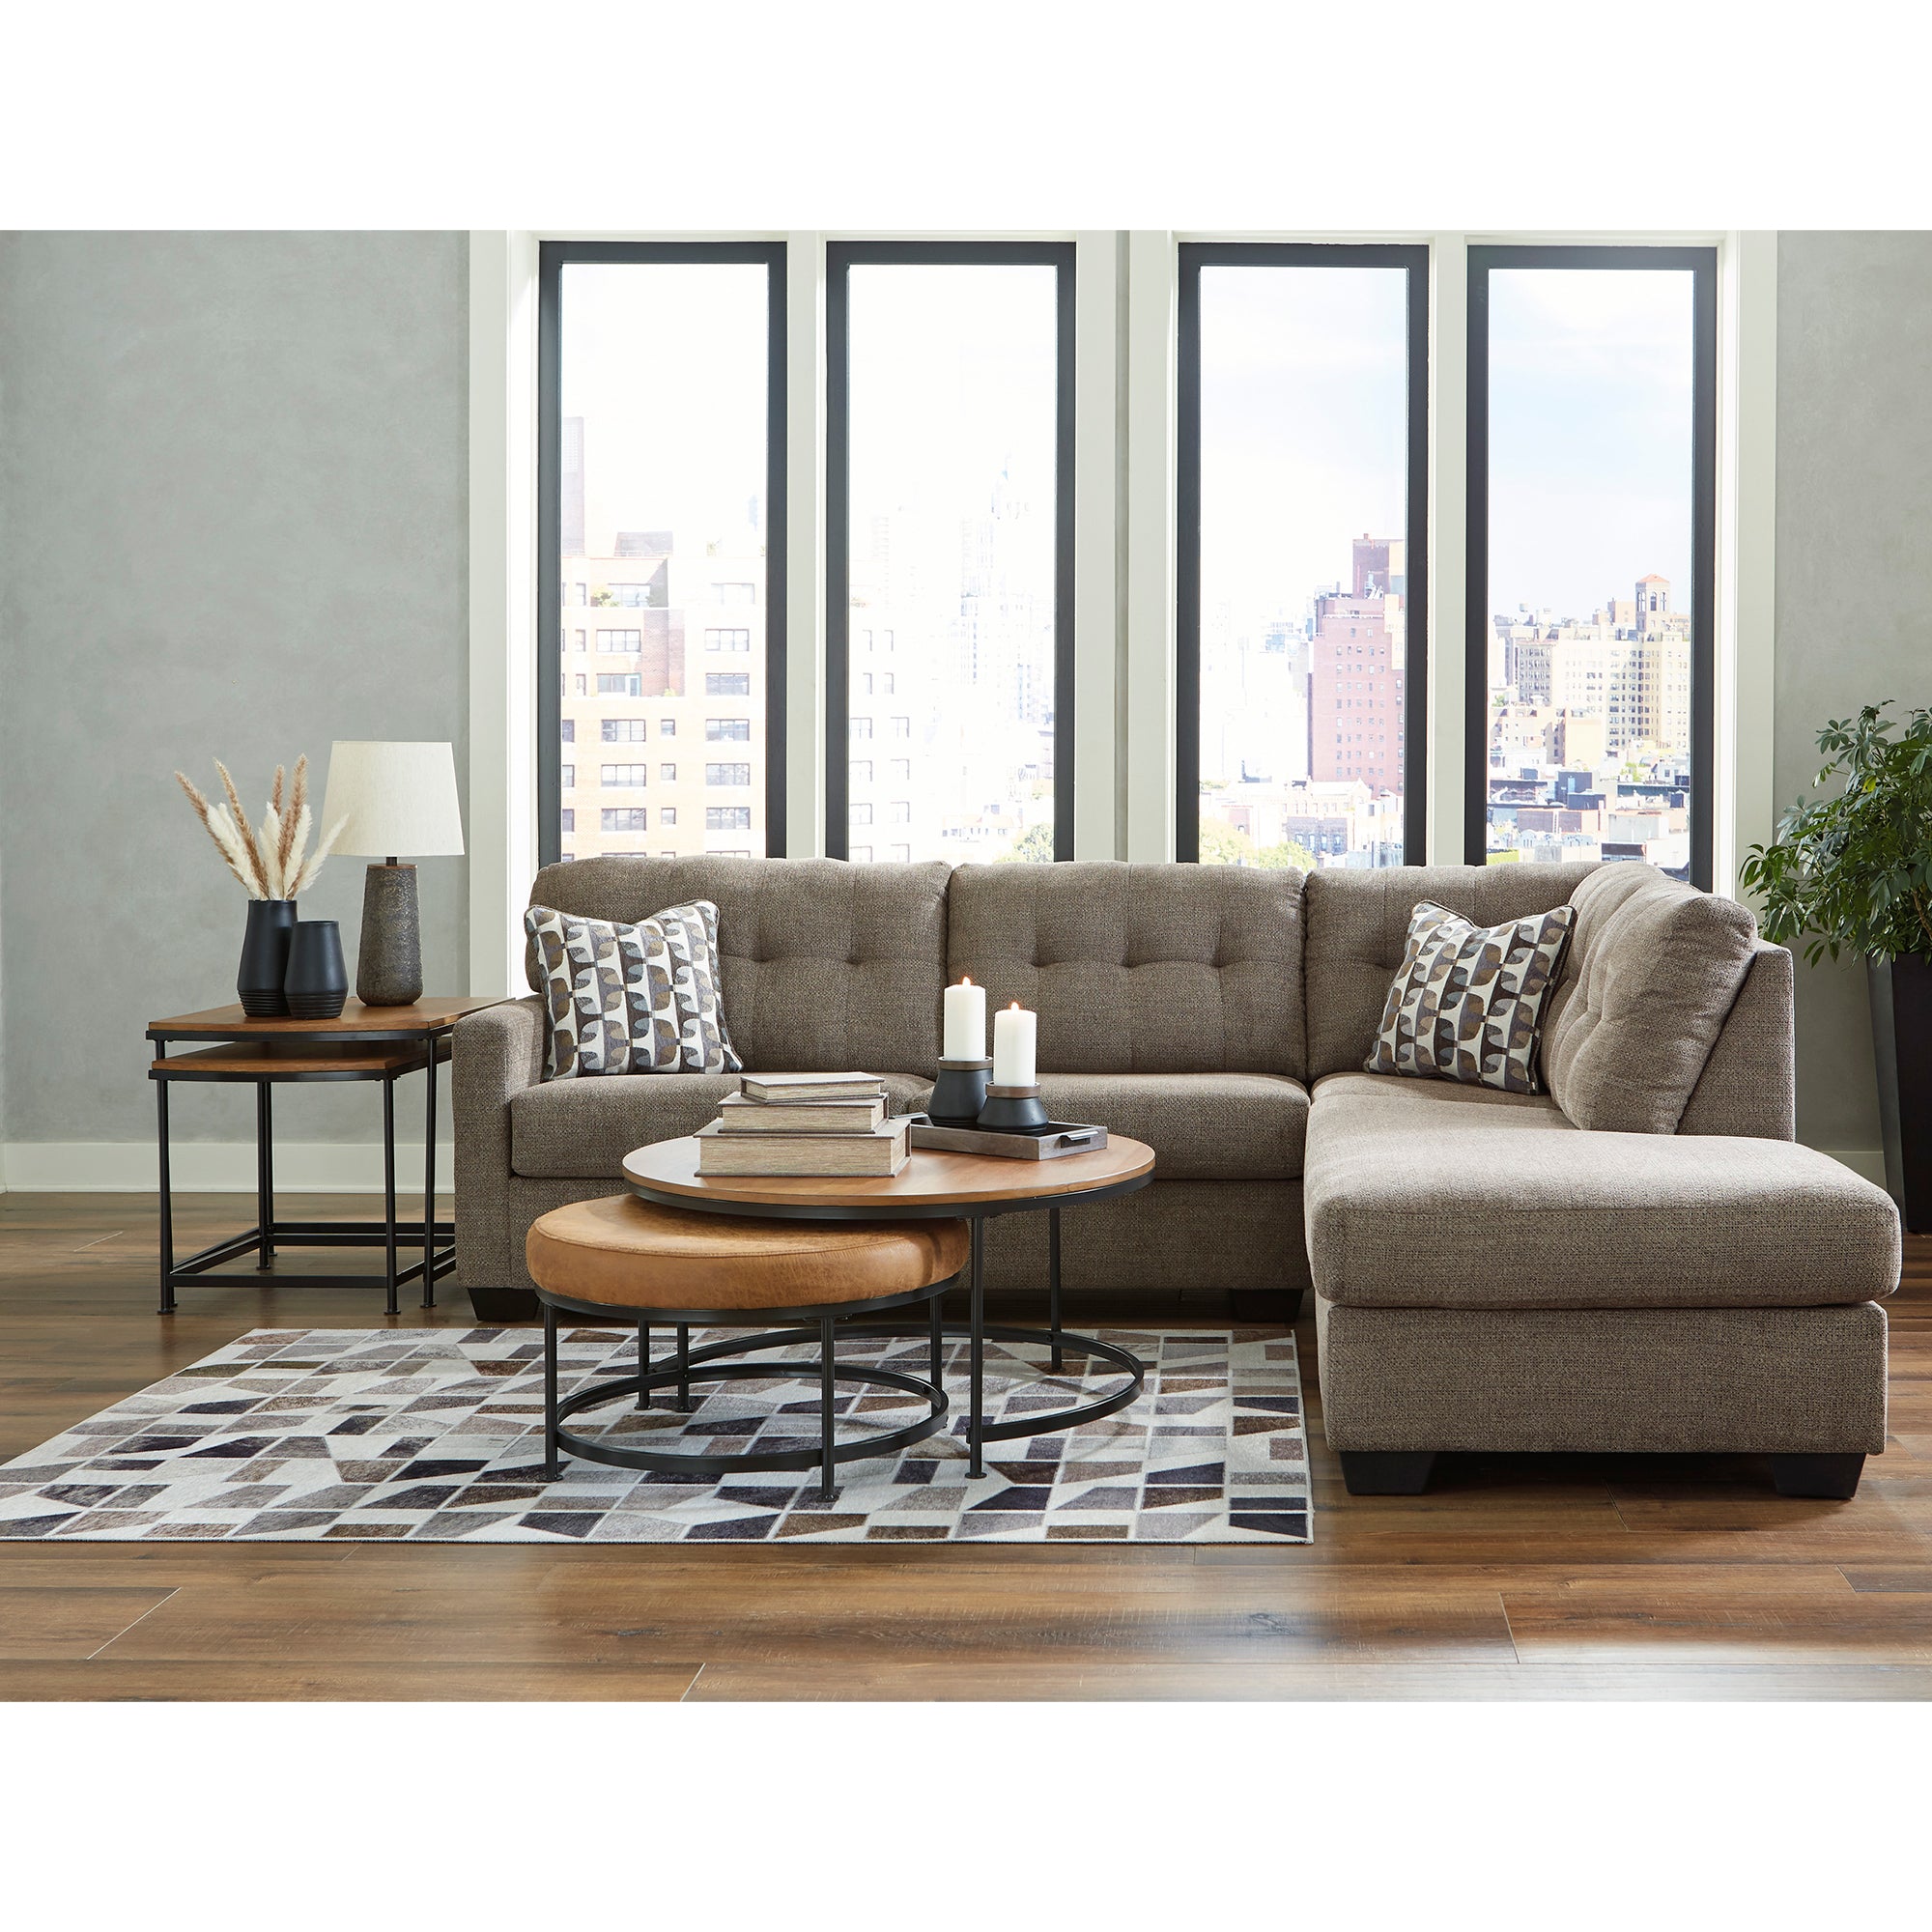 Mahoney 2-Piece Sectional in chocolate, featuring a chaise for extra seating and supreme comfort